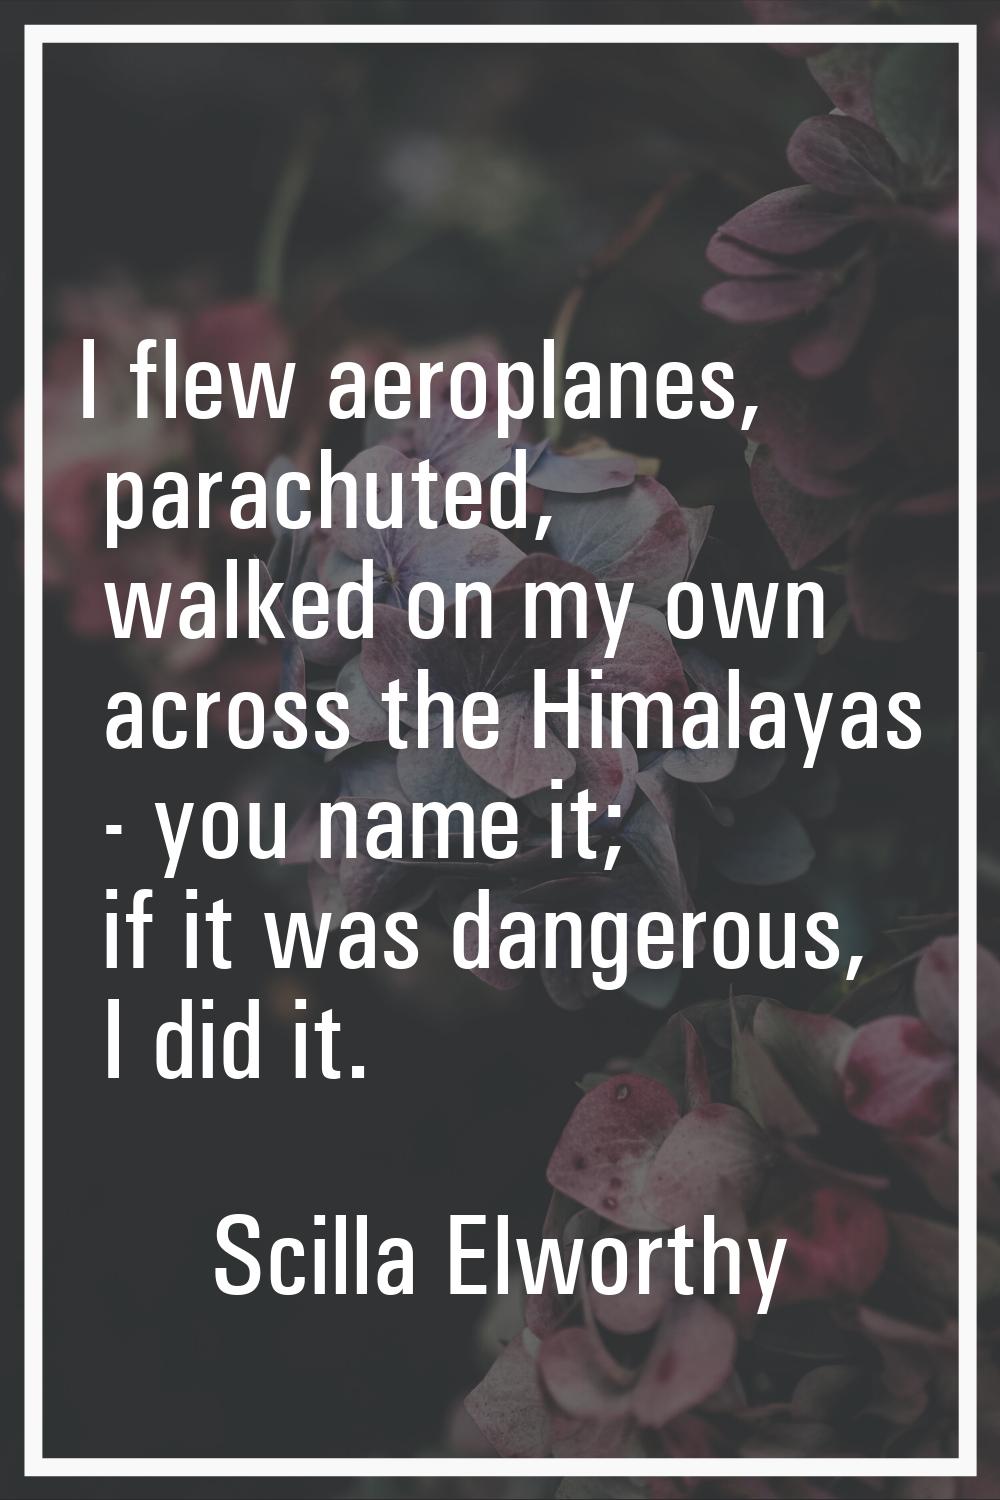 I flew aeroplanes, parachuted, walked on my own across the Himalayas - you name it; if it was dange